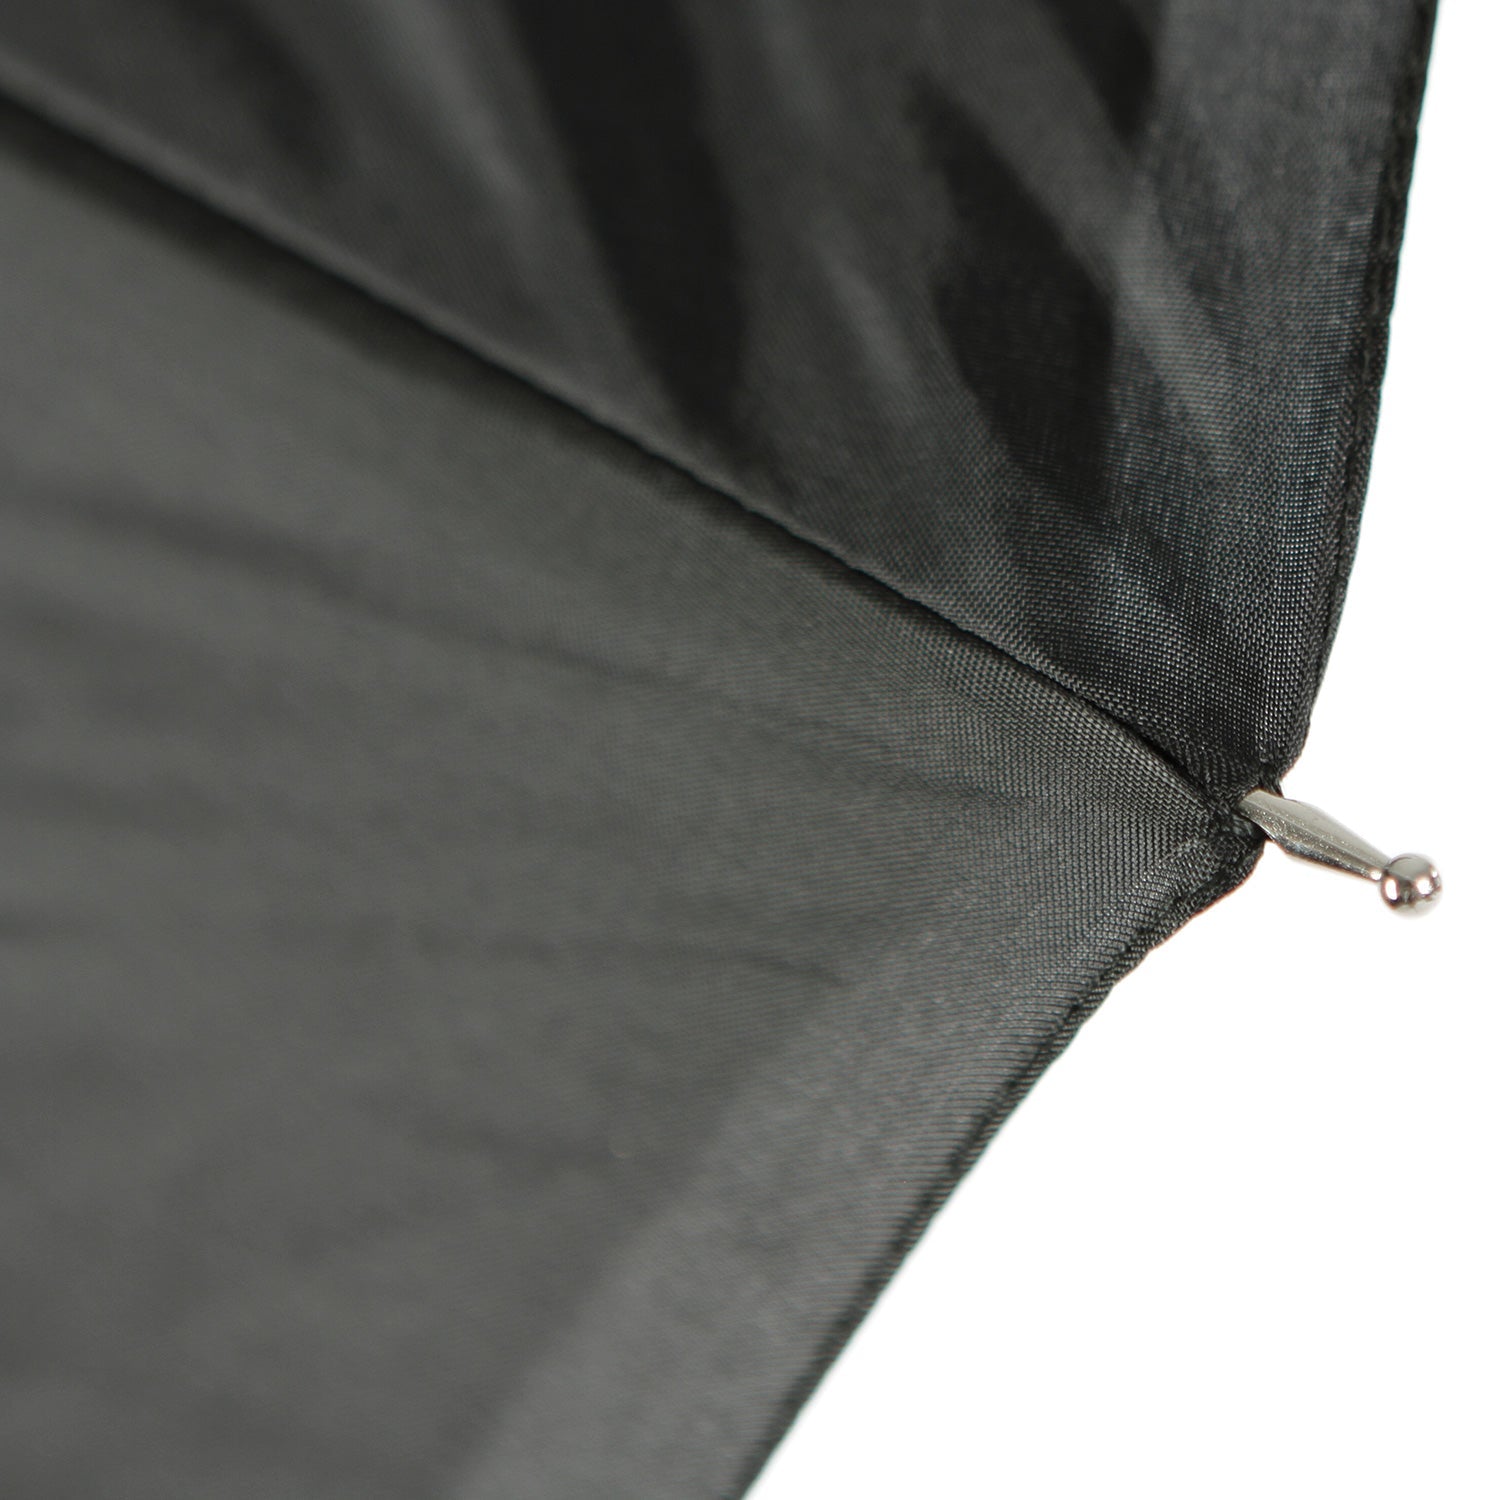 Convertible Umbrella - Optical White Satin with Removable Black Cover (60")